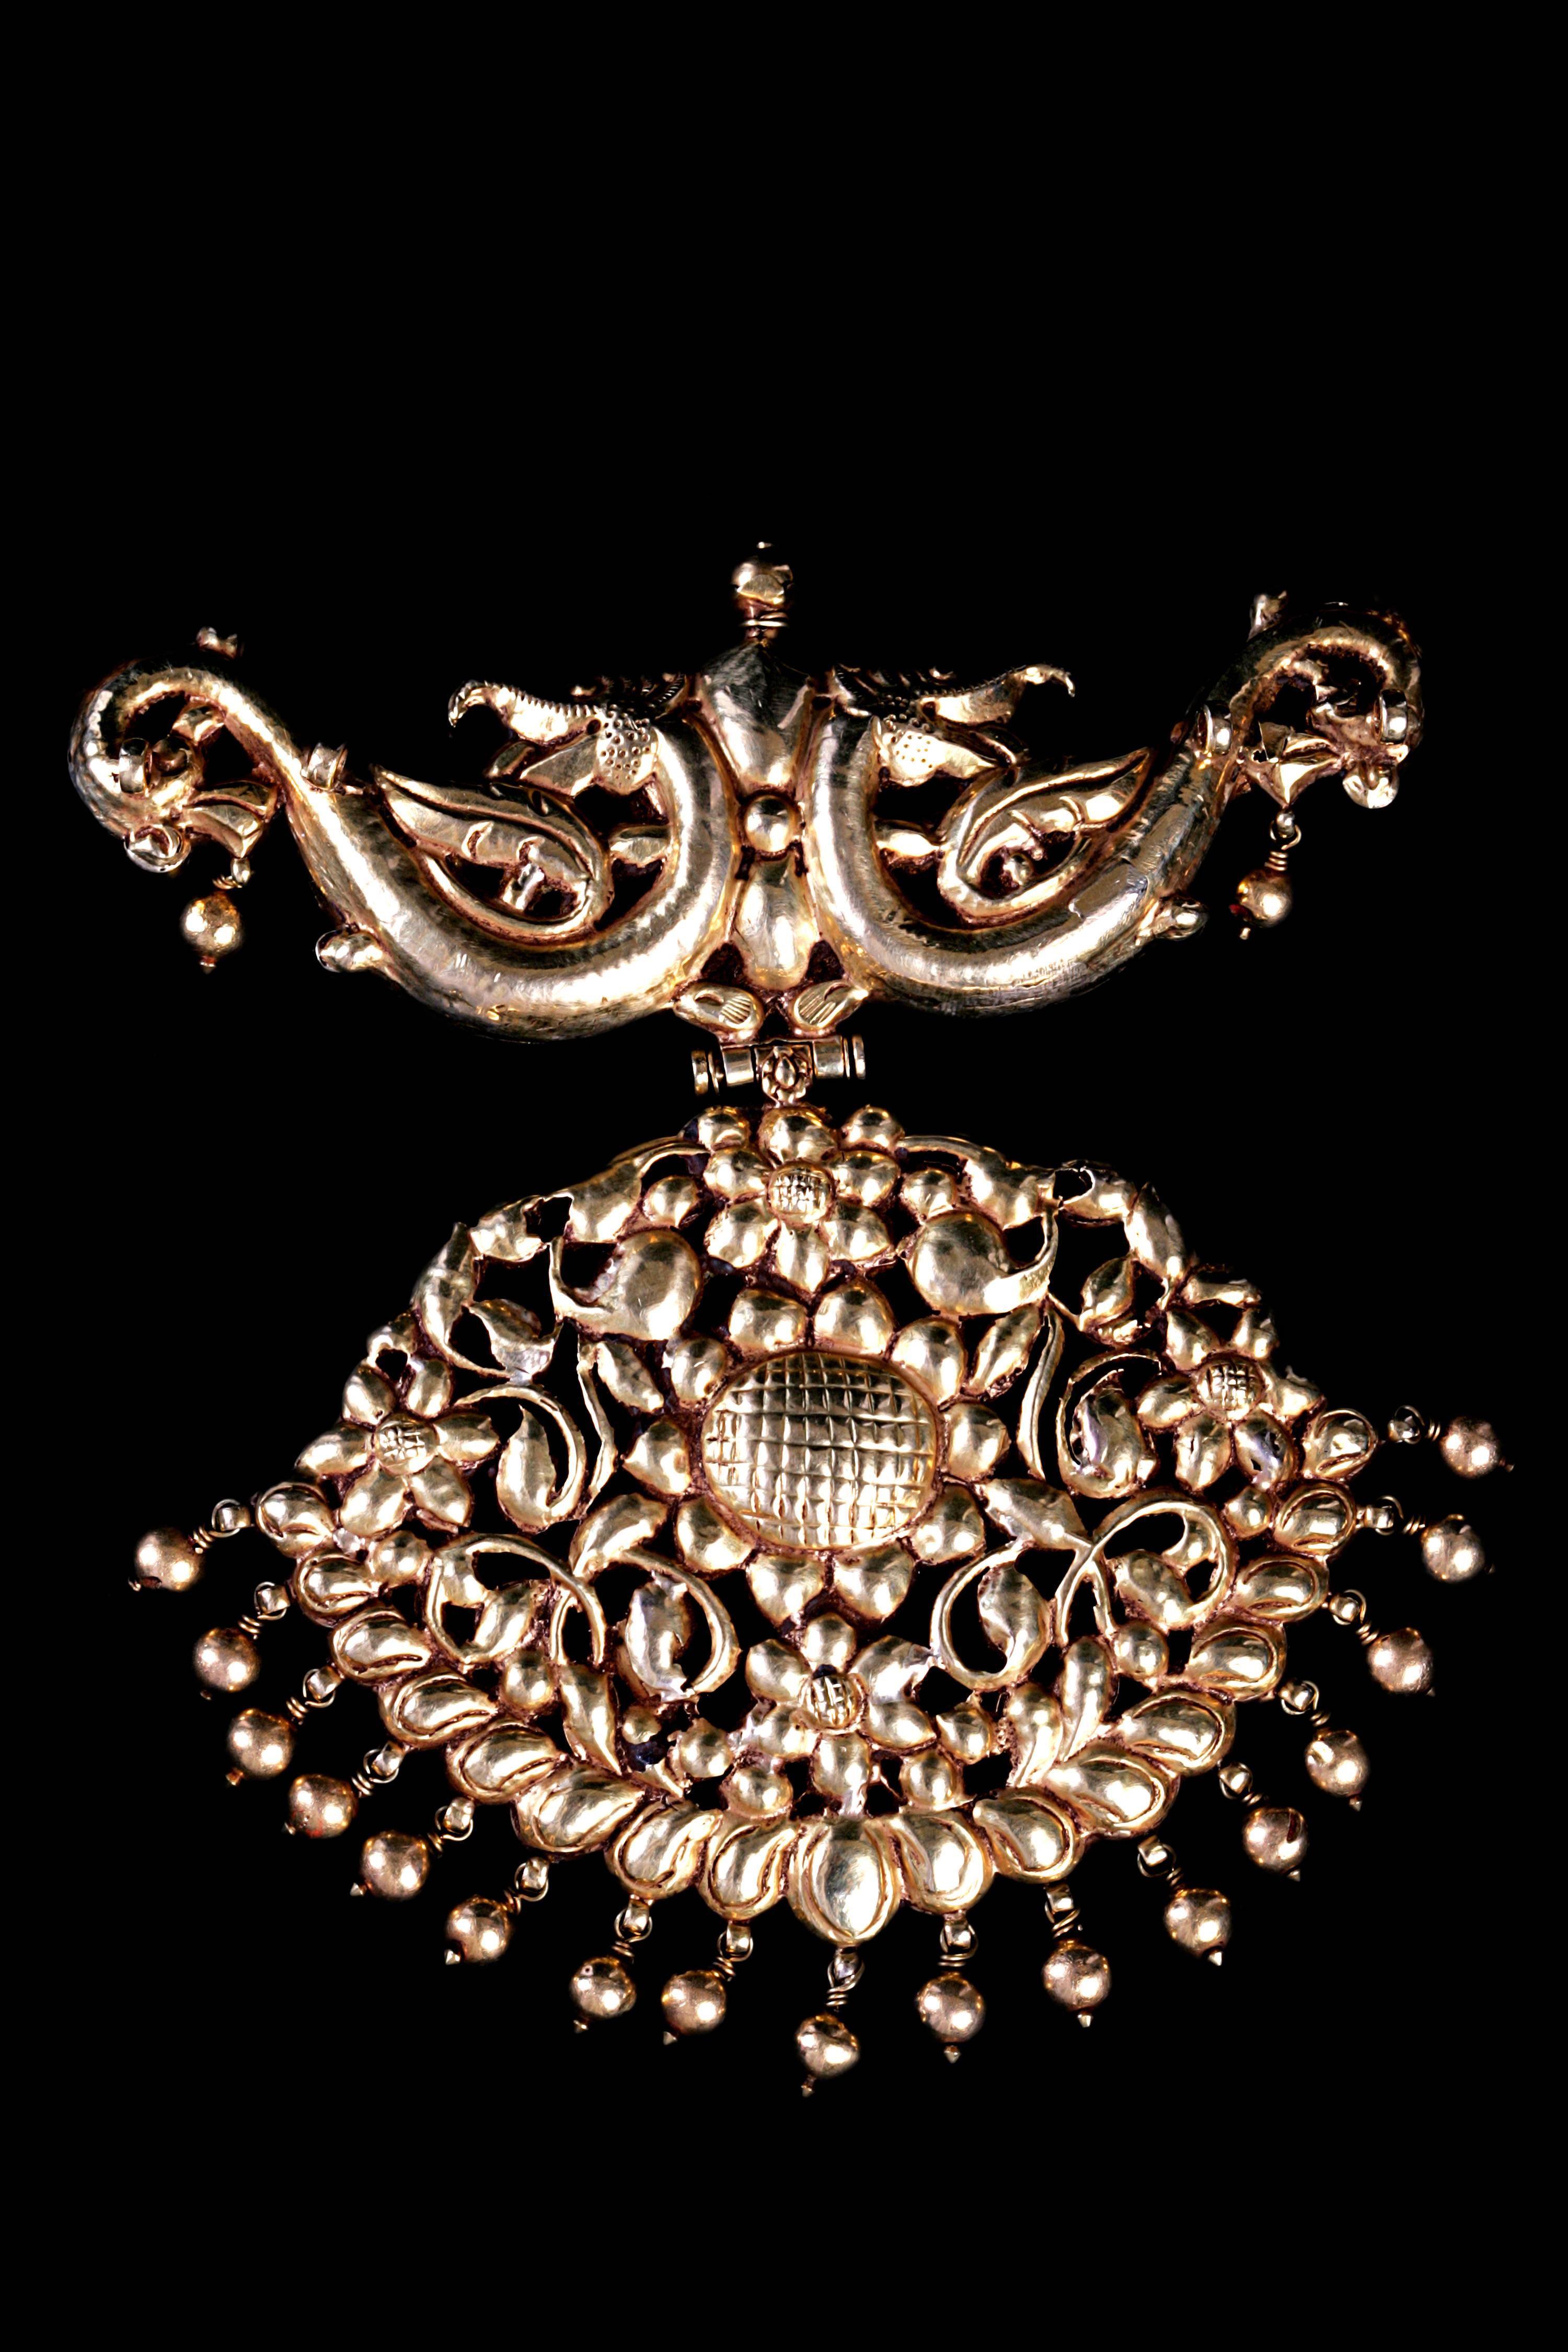 Important old Maharaja gold cardial pendant with Makaras, rubies, emeralds, diamonds and golden hanging spheres. The back shows a floral motif with stunning workmanship of repousse technique, perphaps more beautiful than the front. It comes on a